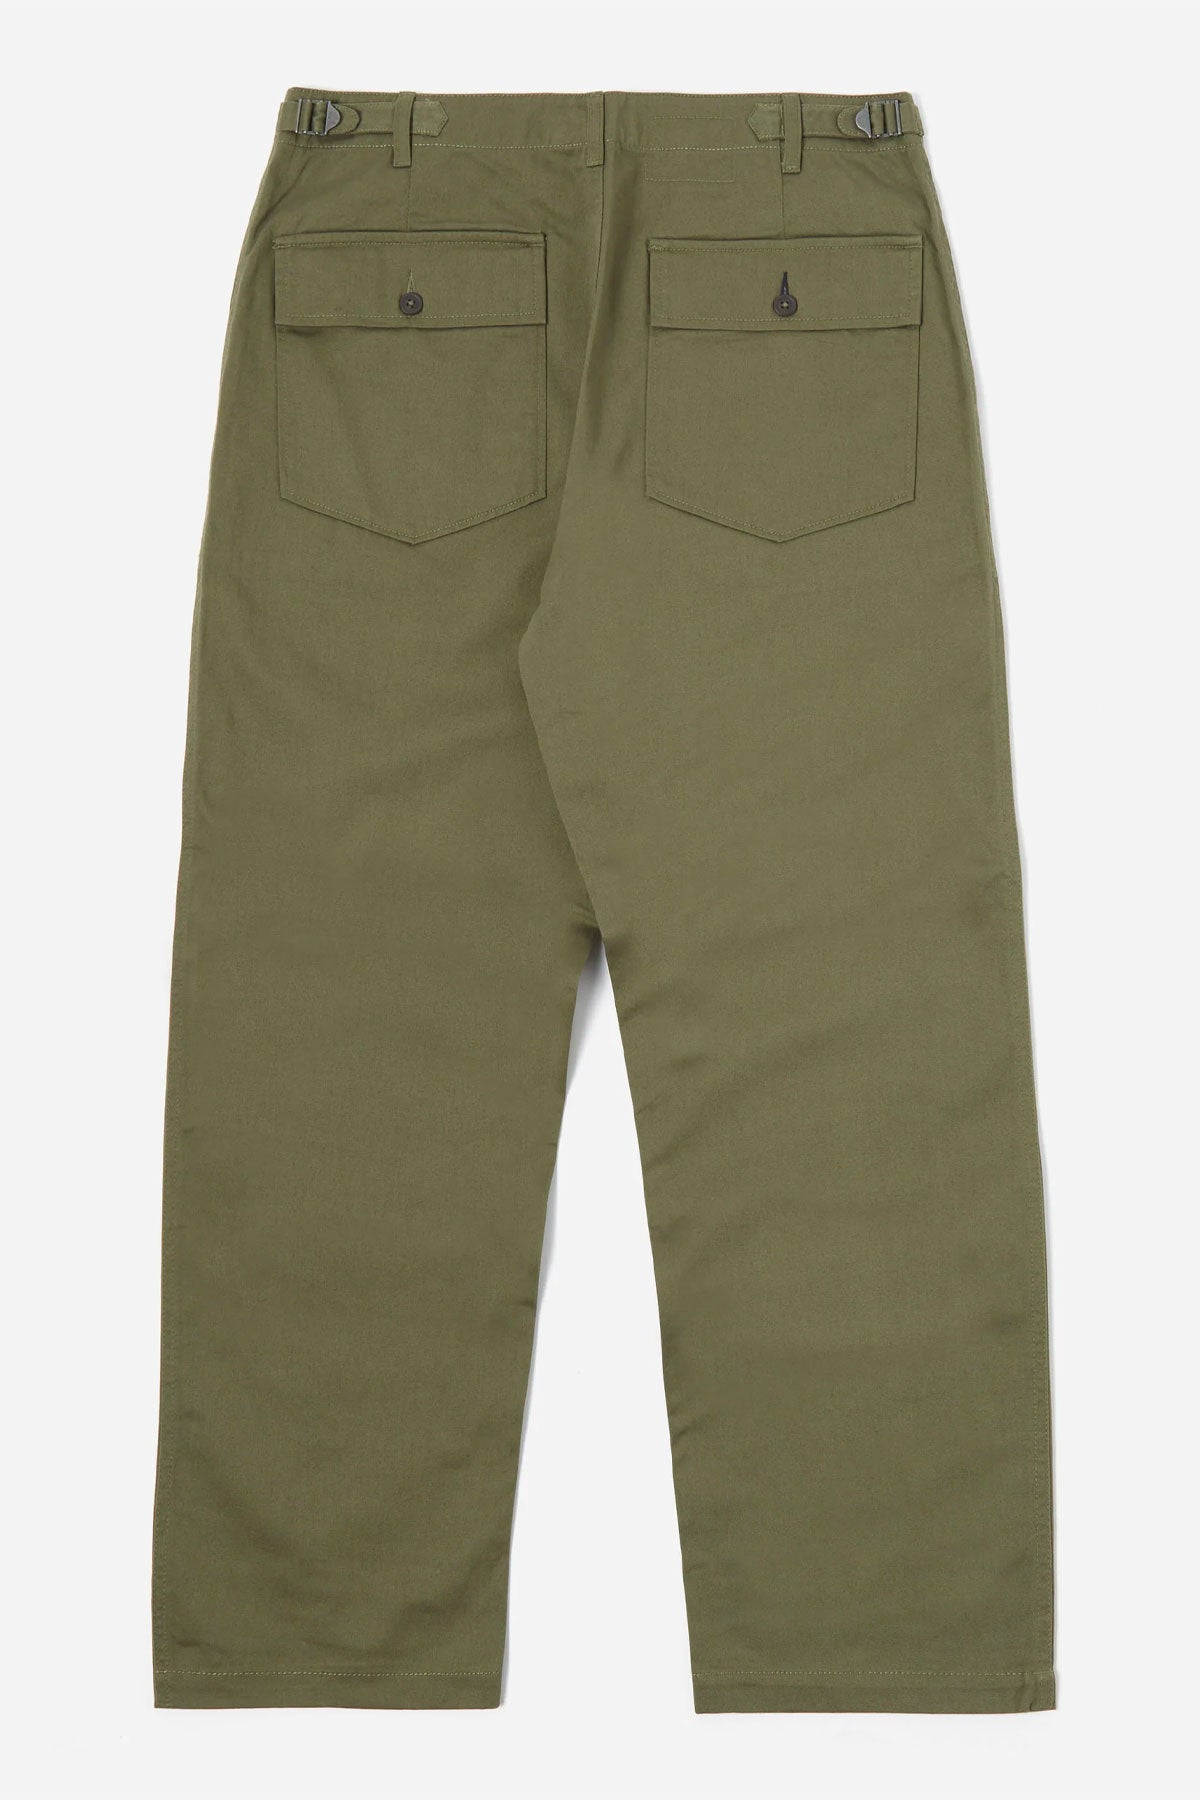 Universal Works - Fatigue Pant In Light Olive Twill